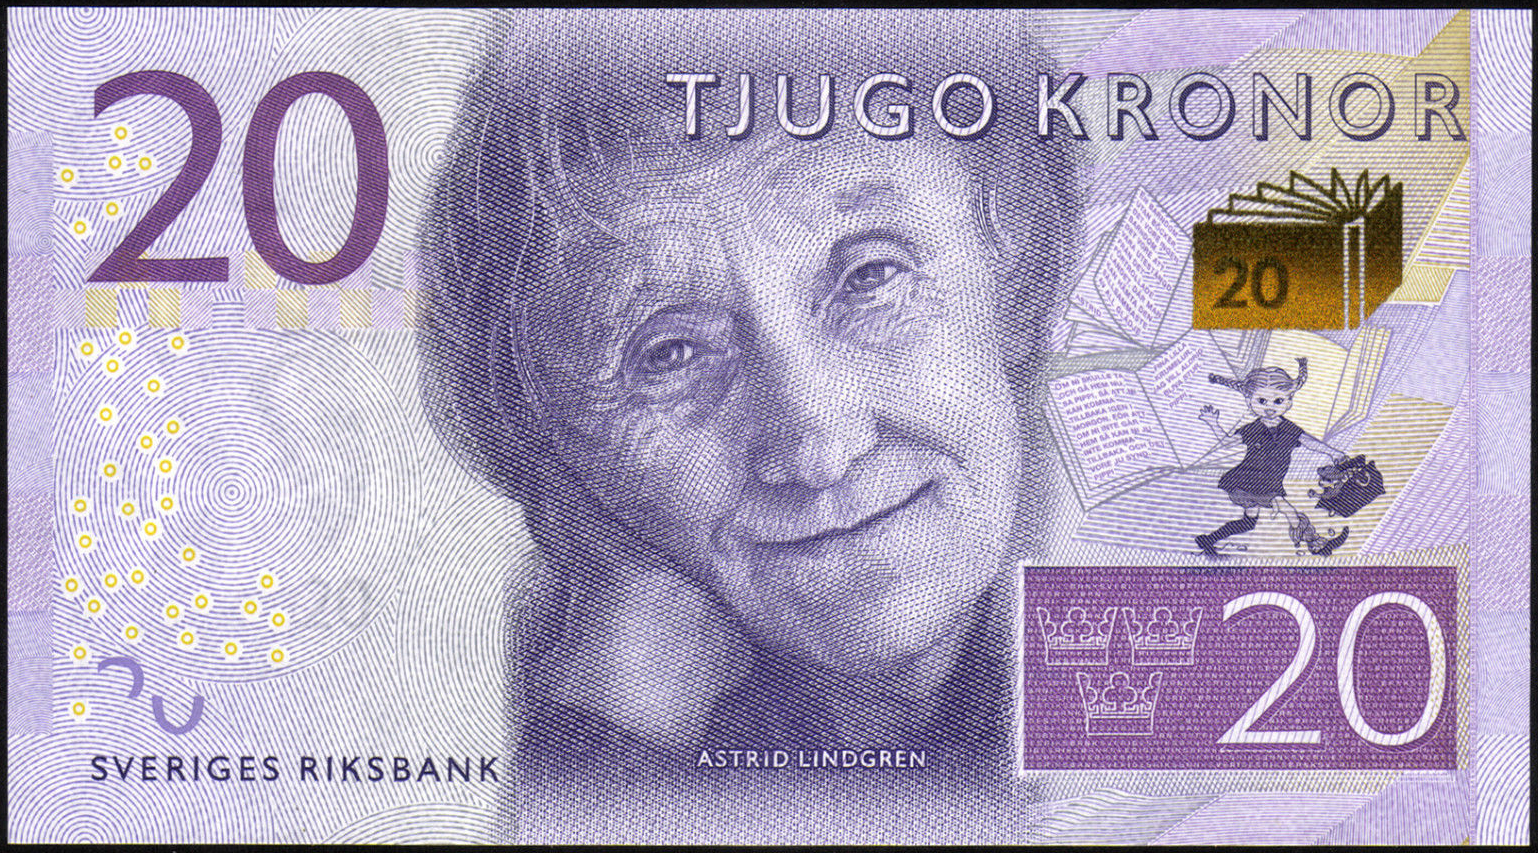 20 Kronor note featuring Astrid Lindgren